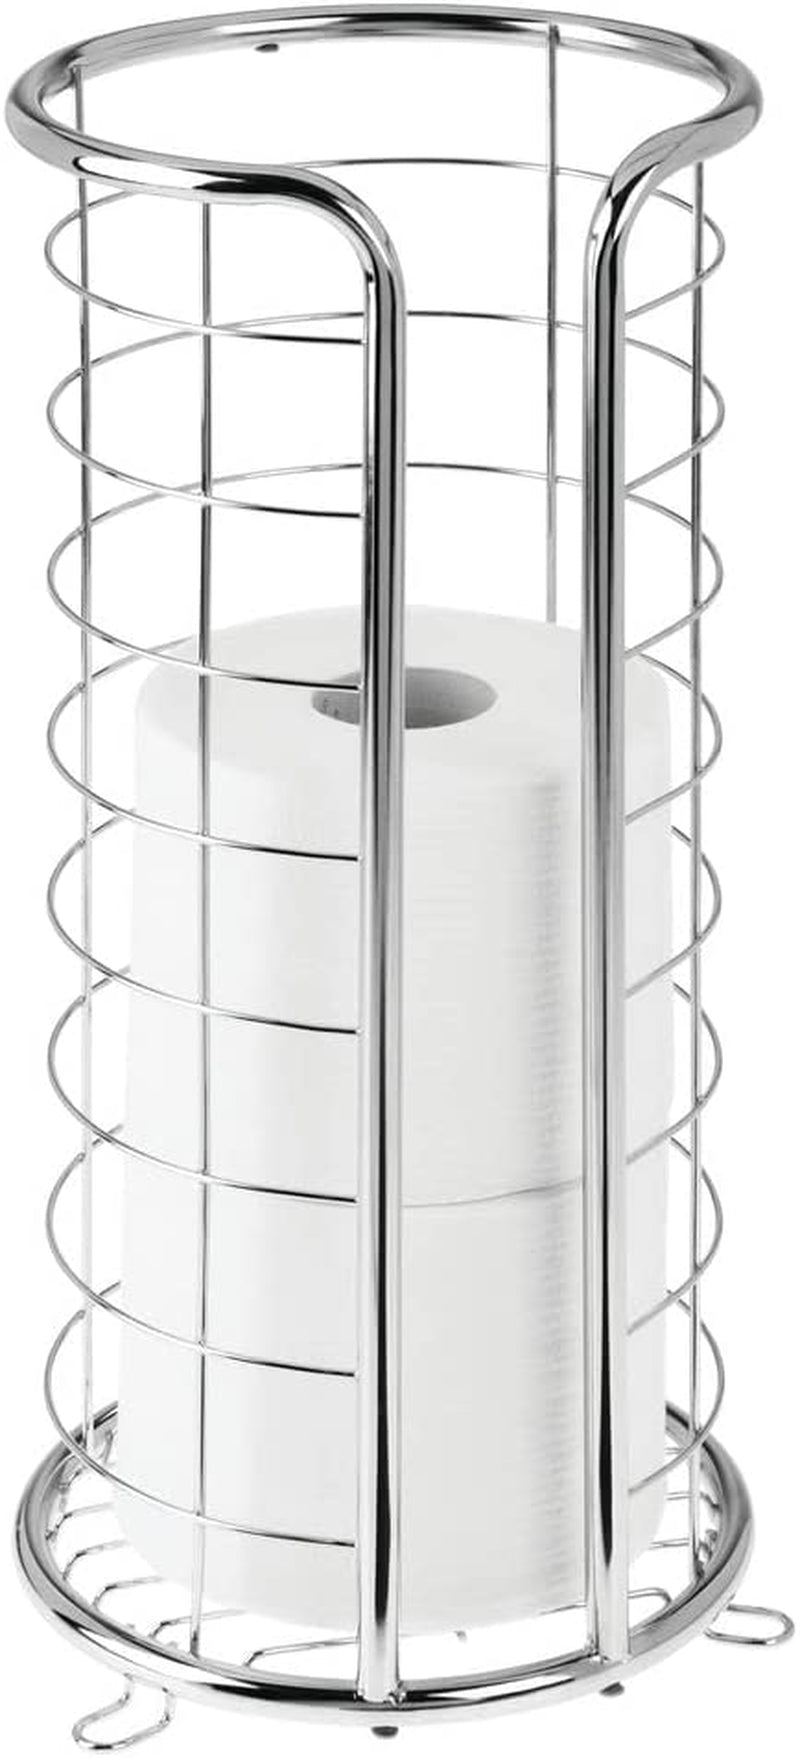 mDesign, Mdesign Metal Free Standing Toilet Paper Organizer Stand - 3 Rolls of Jumbo Toilet Tissue Storage - Bathroom Decor Accessory for under Sink, Vanity, and inside Cabinet Shelf - Omni Collection, Chrome